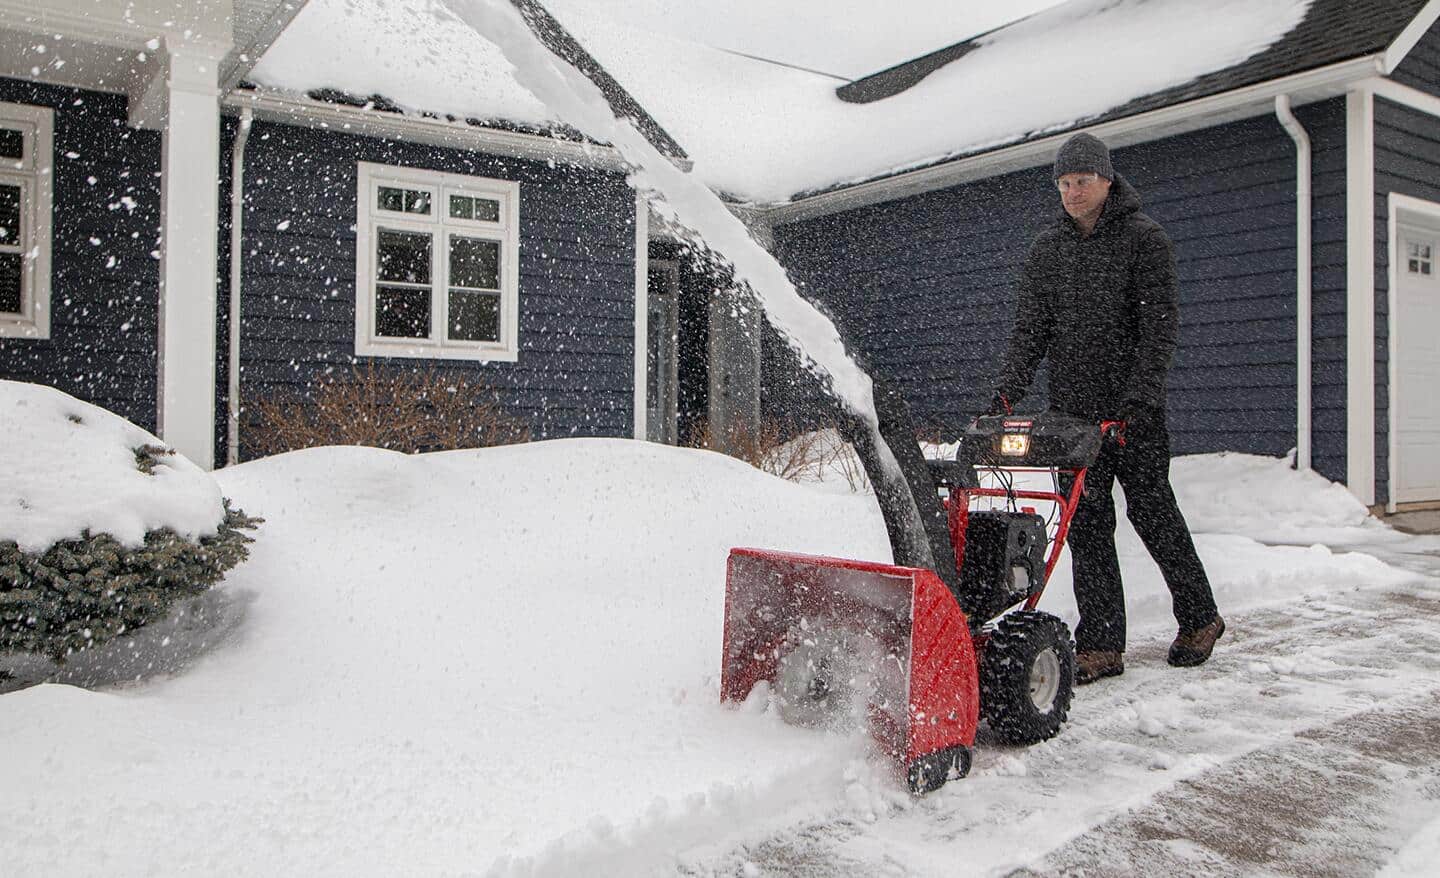 A person clearing a walkway in front of a home with a red three-stage snow blower.